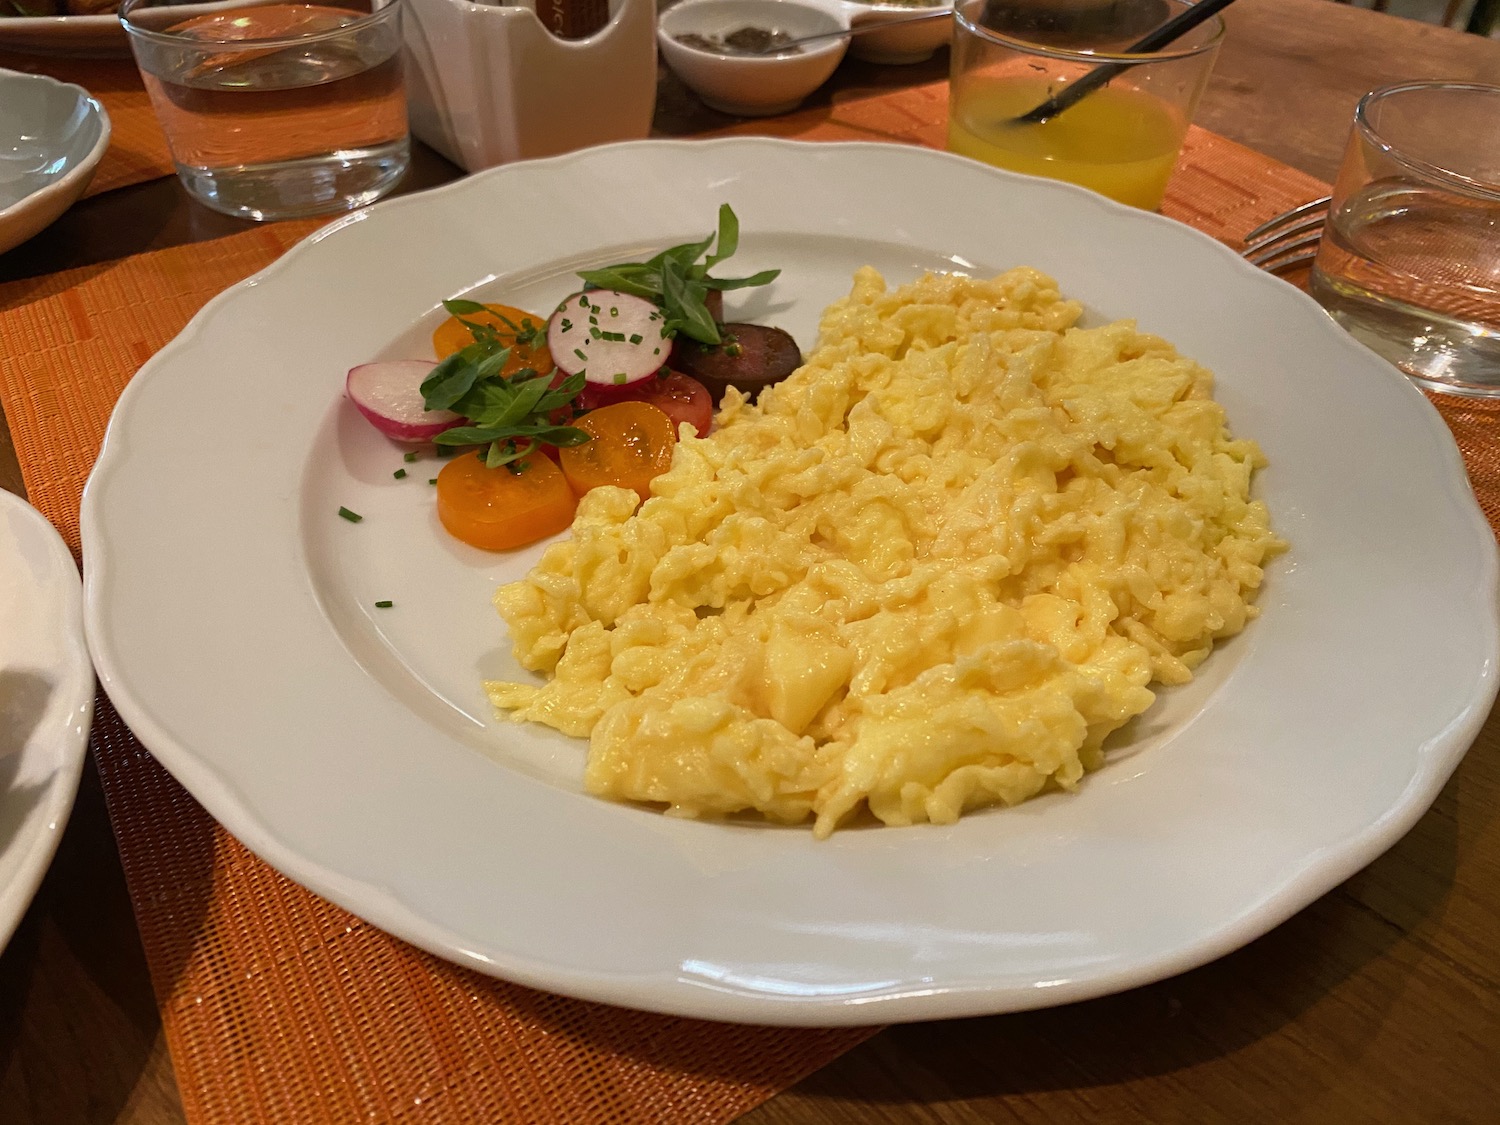 a plate of scrambled eggs and vegetables